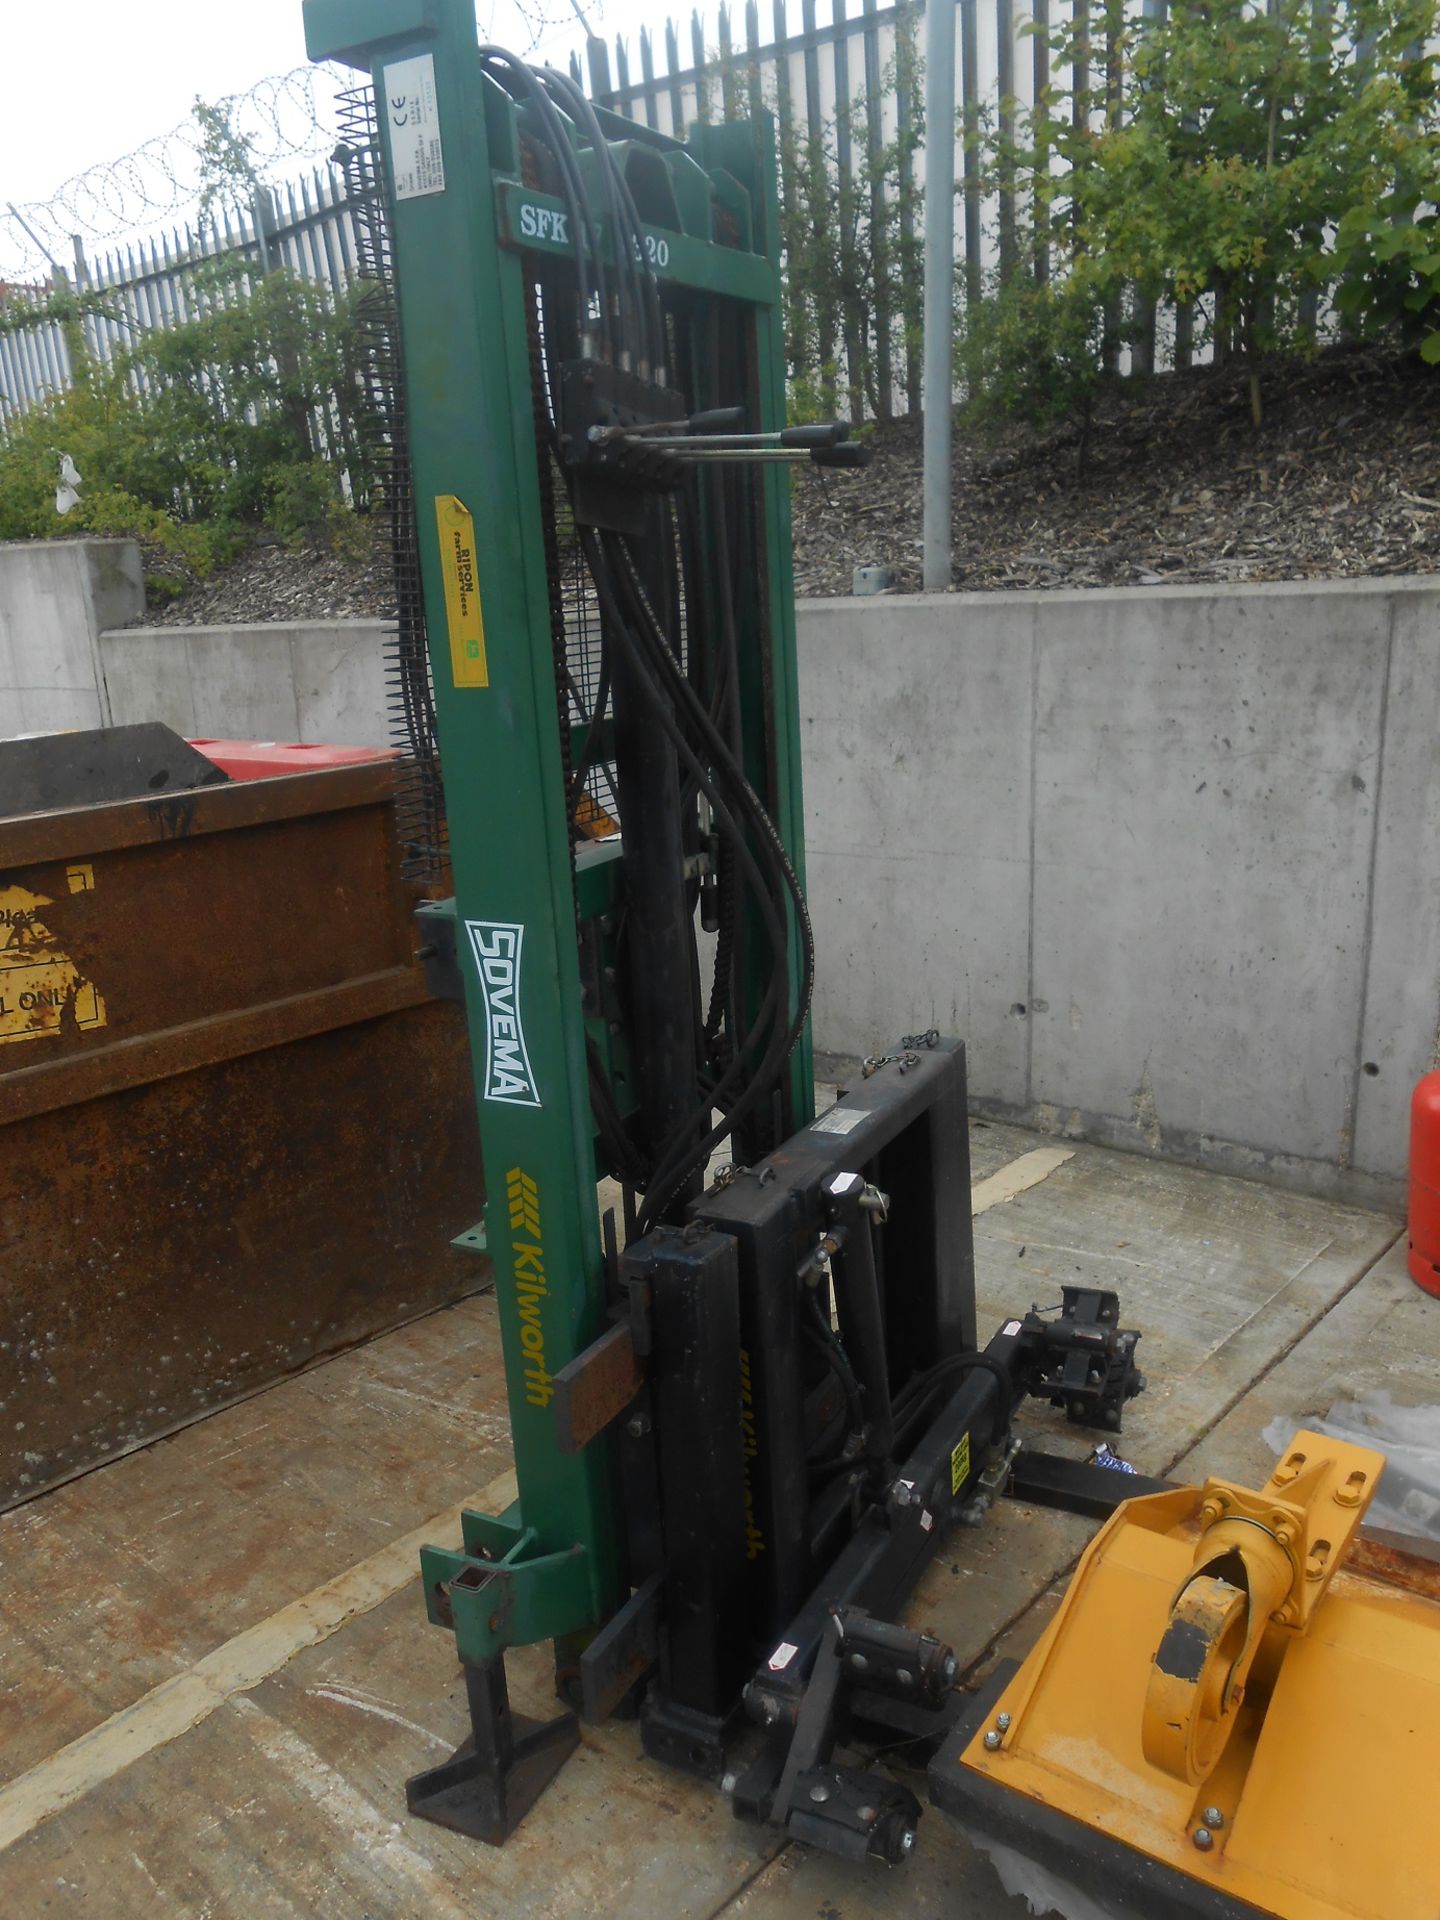 KILWORTH 3 POINT LINKAGE FORKLIFT c/w POST LIFTER DIRECT LOCAL AUTHORITY - Image 2 of 3